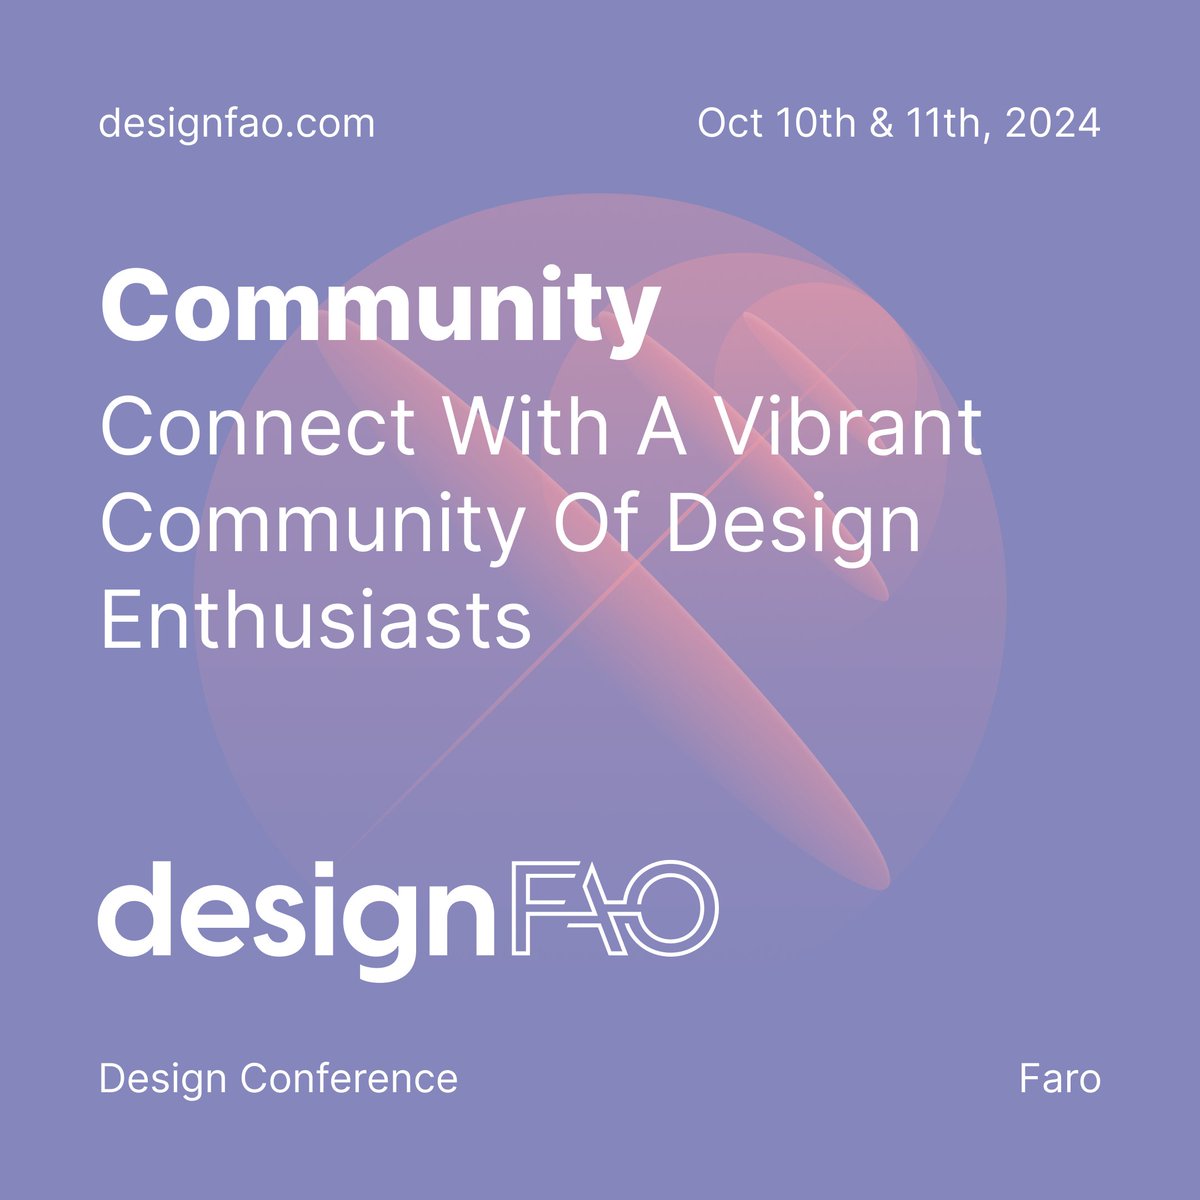 Community
Connect with a vibrant community of design enthusiasts.

Secure your tickets now and be at the forefront of creativity at designFAO 2024!

#designFAO24 #aidesign #designsystems #personalbrand #spatialdesign